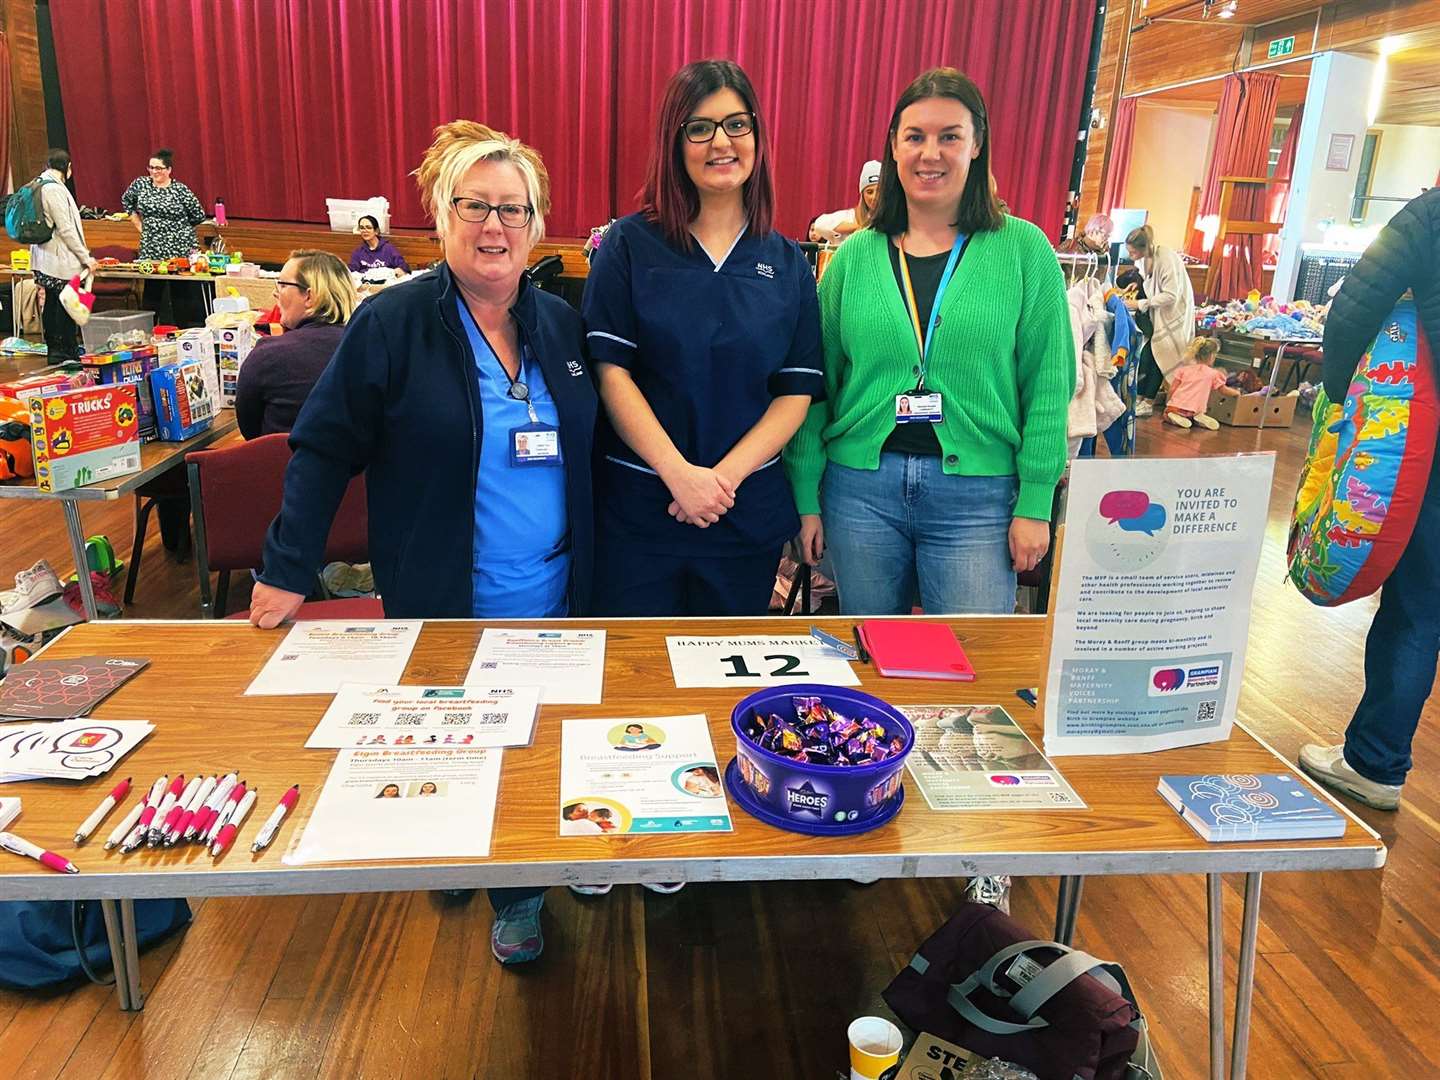 Kerri Morrison (Community Midwife - Speyside), Linda Tull (Community Midwife - Forres) and Hannah Ronald (NHS Grampian Maternity Services Community Engagement Manager) at Elgin Town Hall, October 2022.